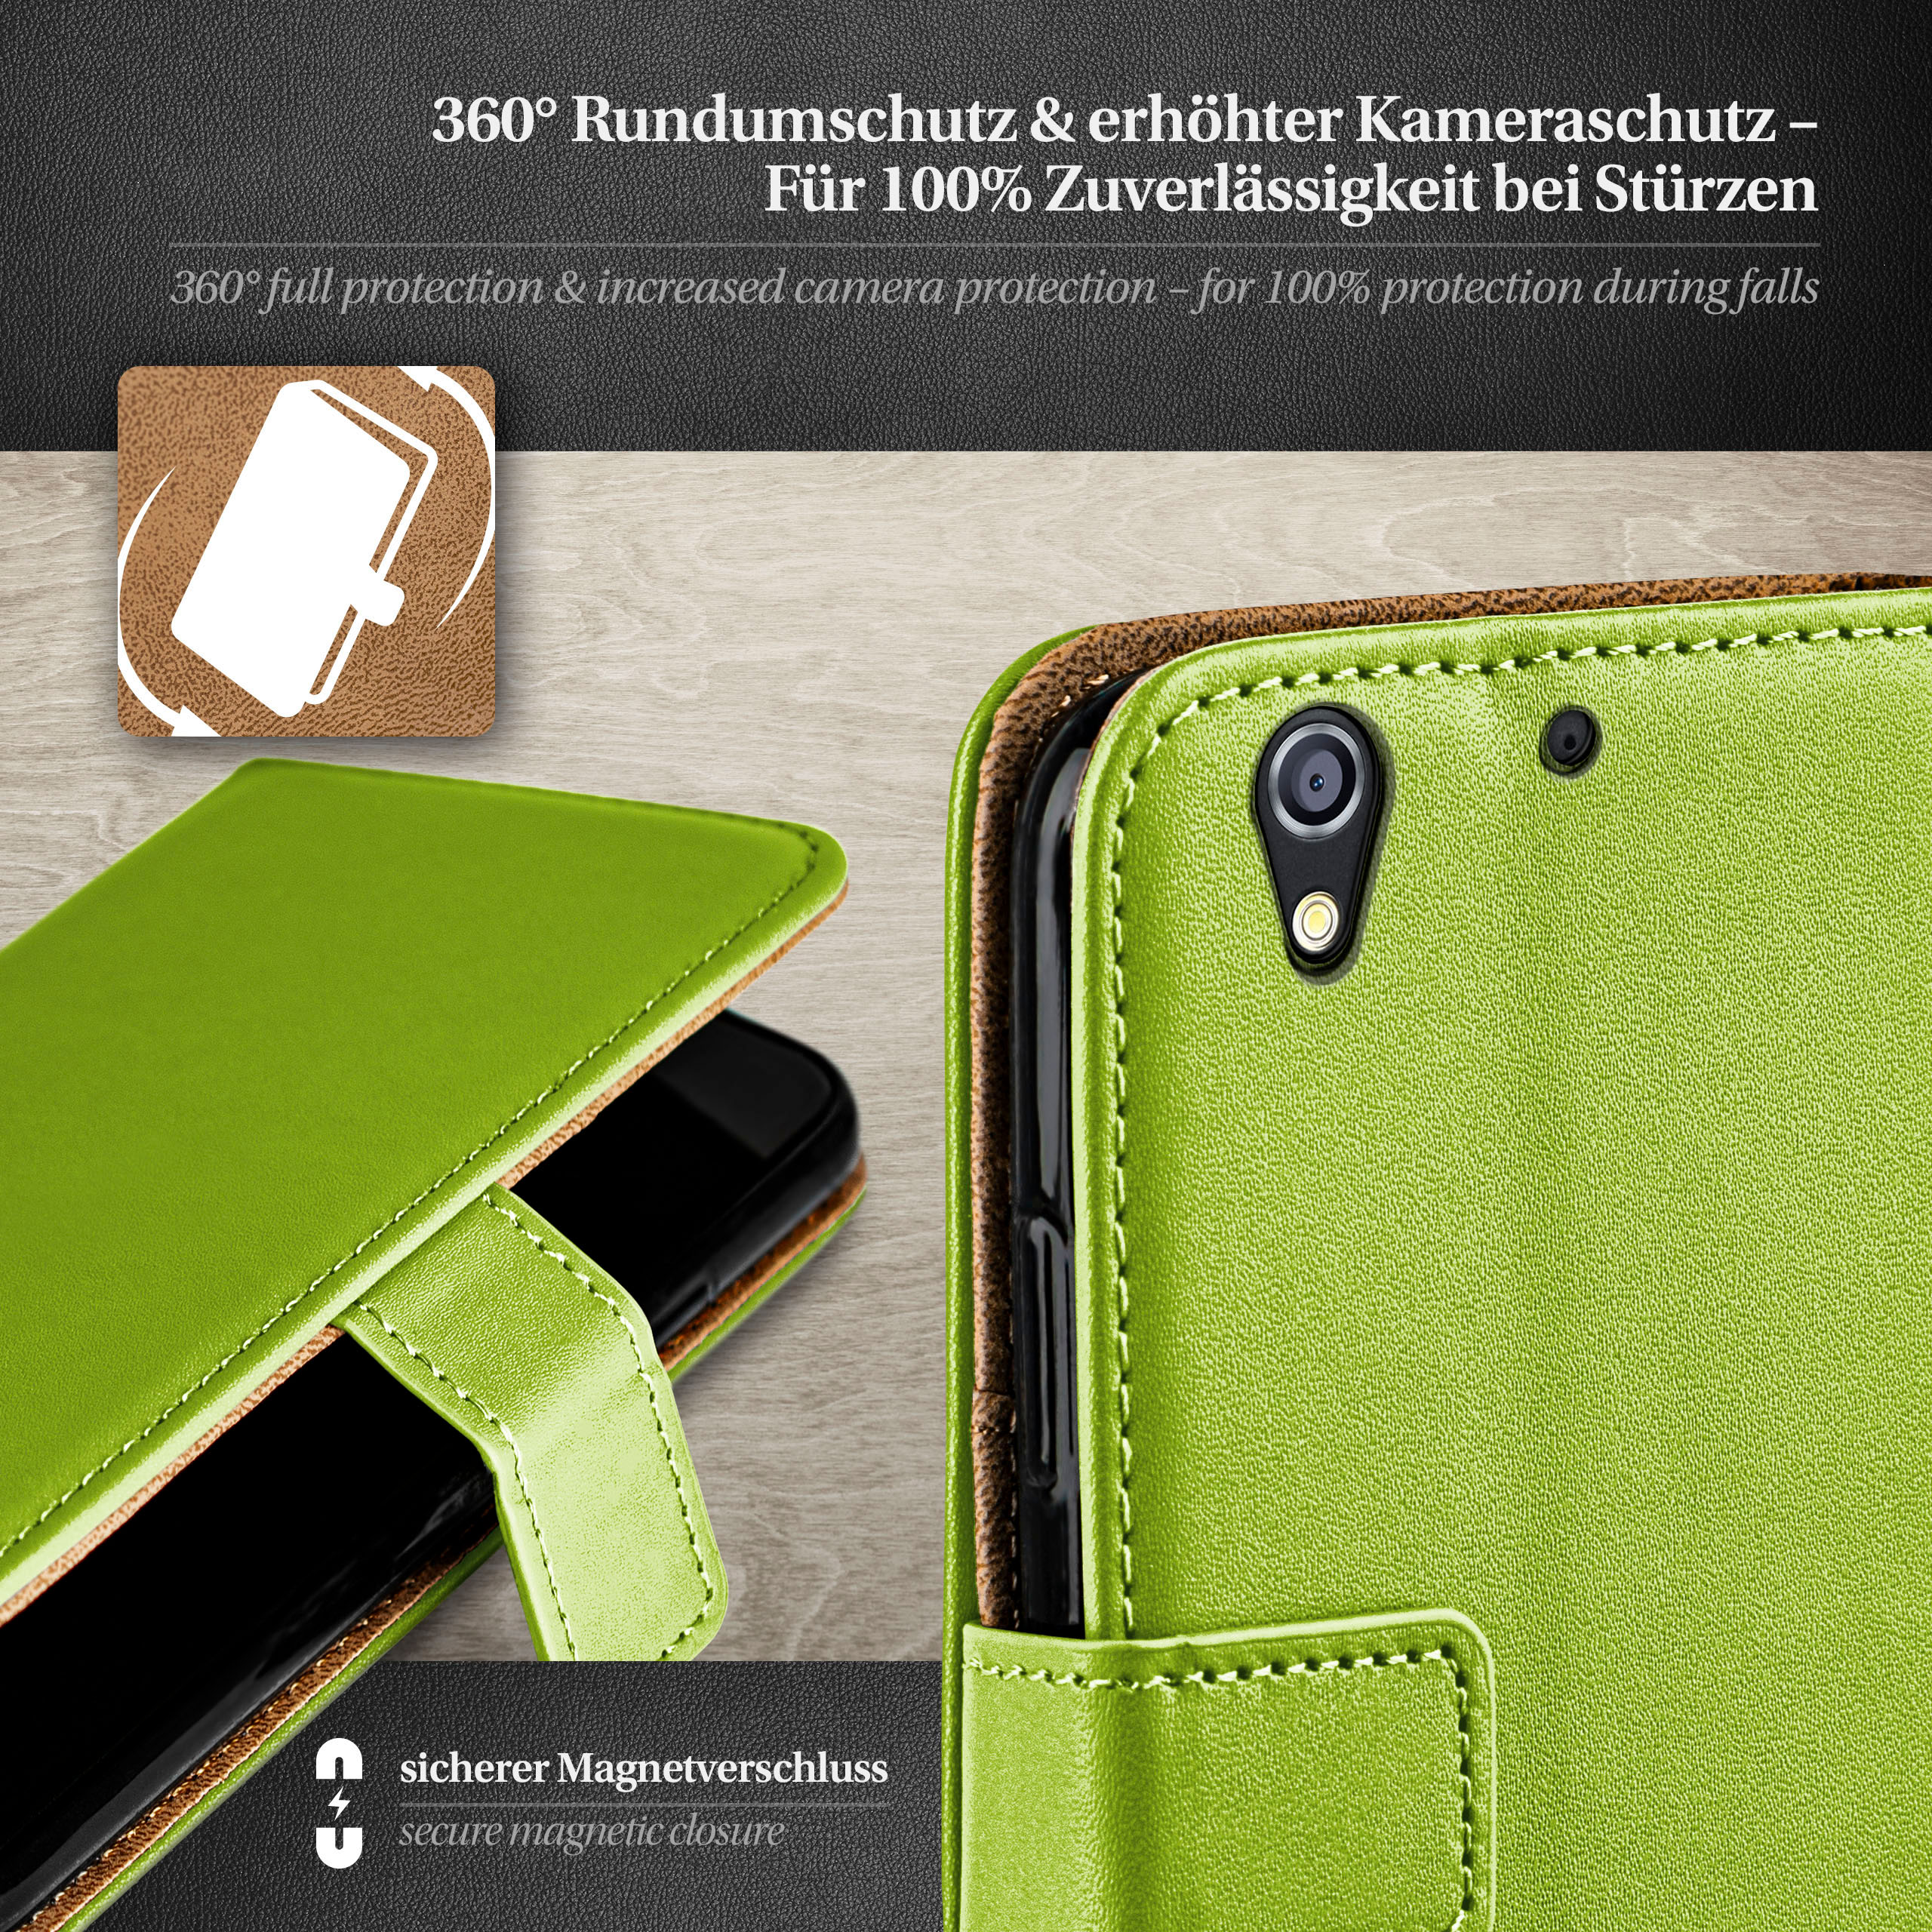 626G, HTC, Case, Bookcover, Lime-Green Book Desire MOEX